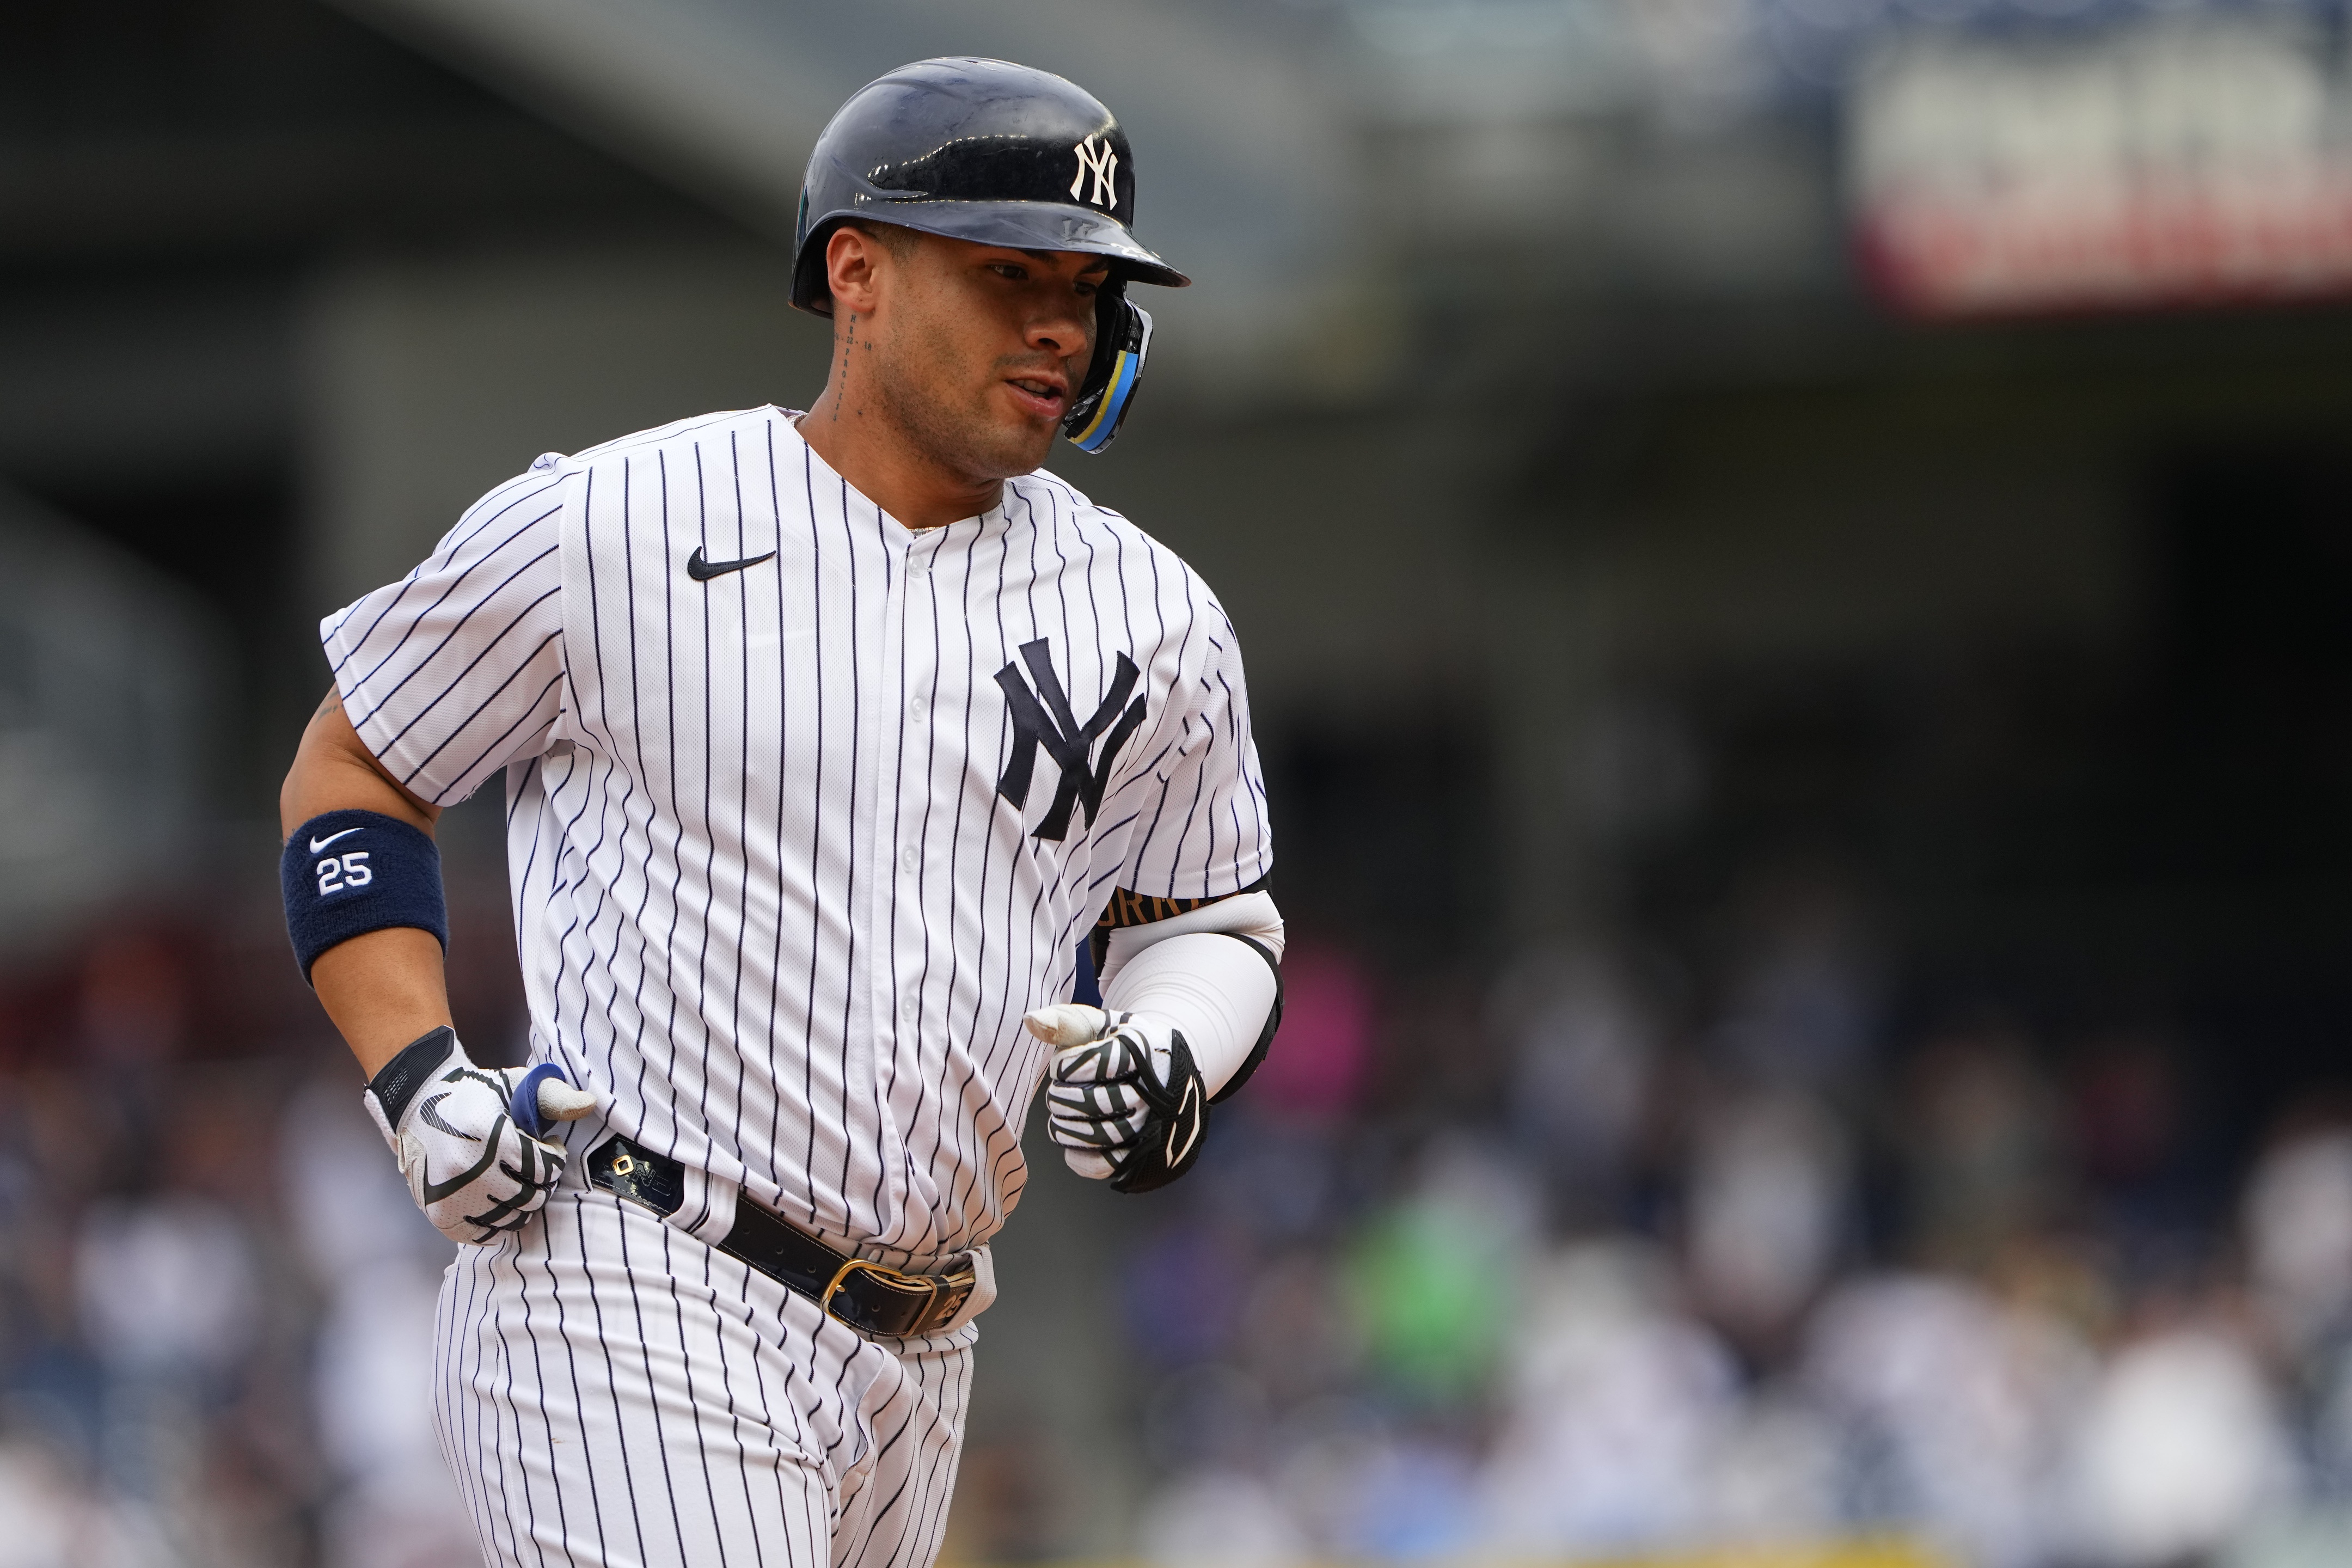 Max Goodman on X: Gleyber Torres on his rock the baby celebration tonight,  responding to Josh Naylor: “We felt like it was a little bit disrespectful  for the team. Not just for